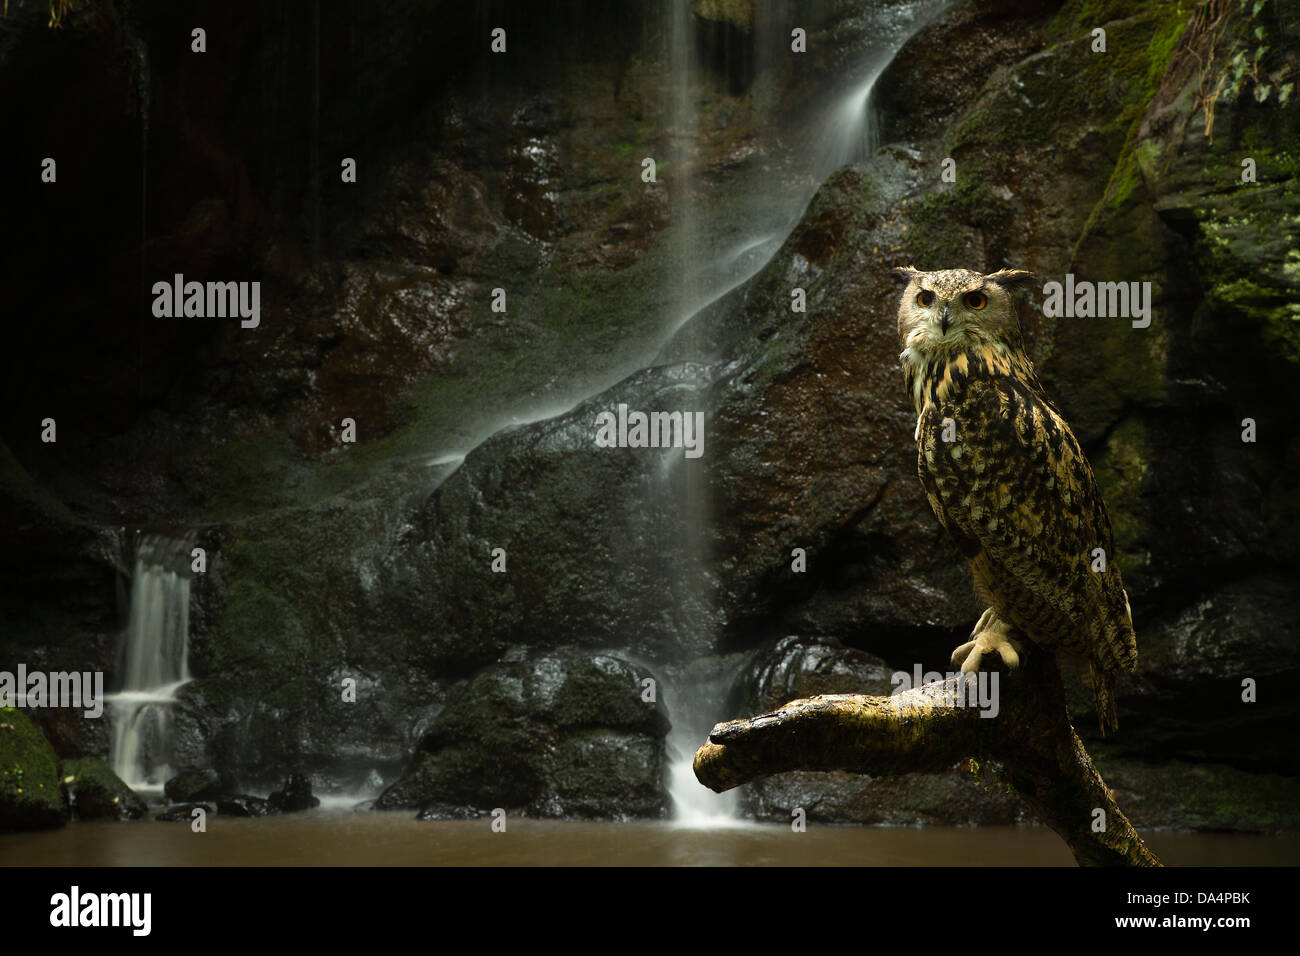 Eurasian Eagle Owl (Bubo Bubo) perched in front of a waterfall Stock Photo